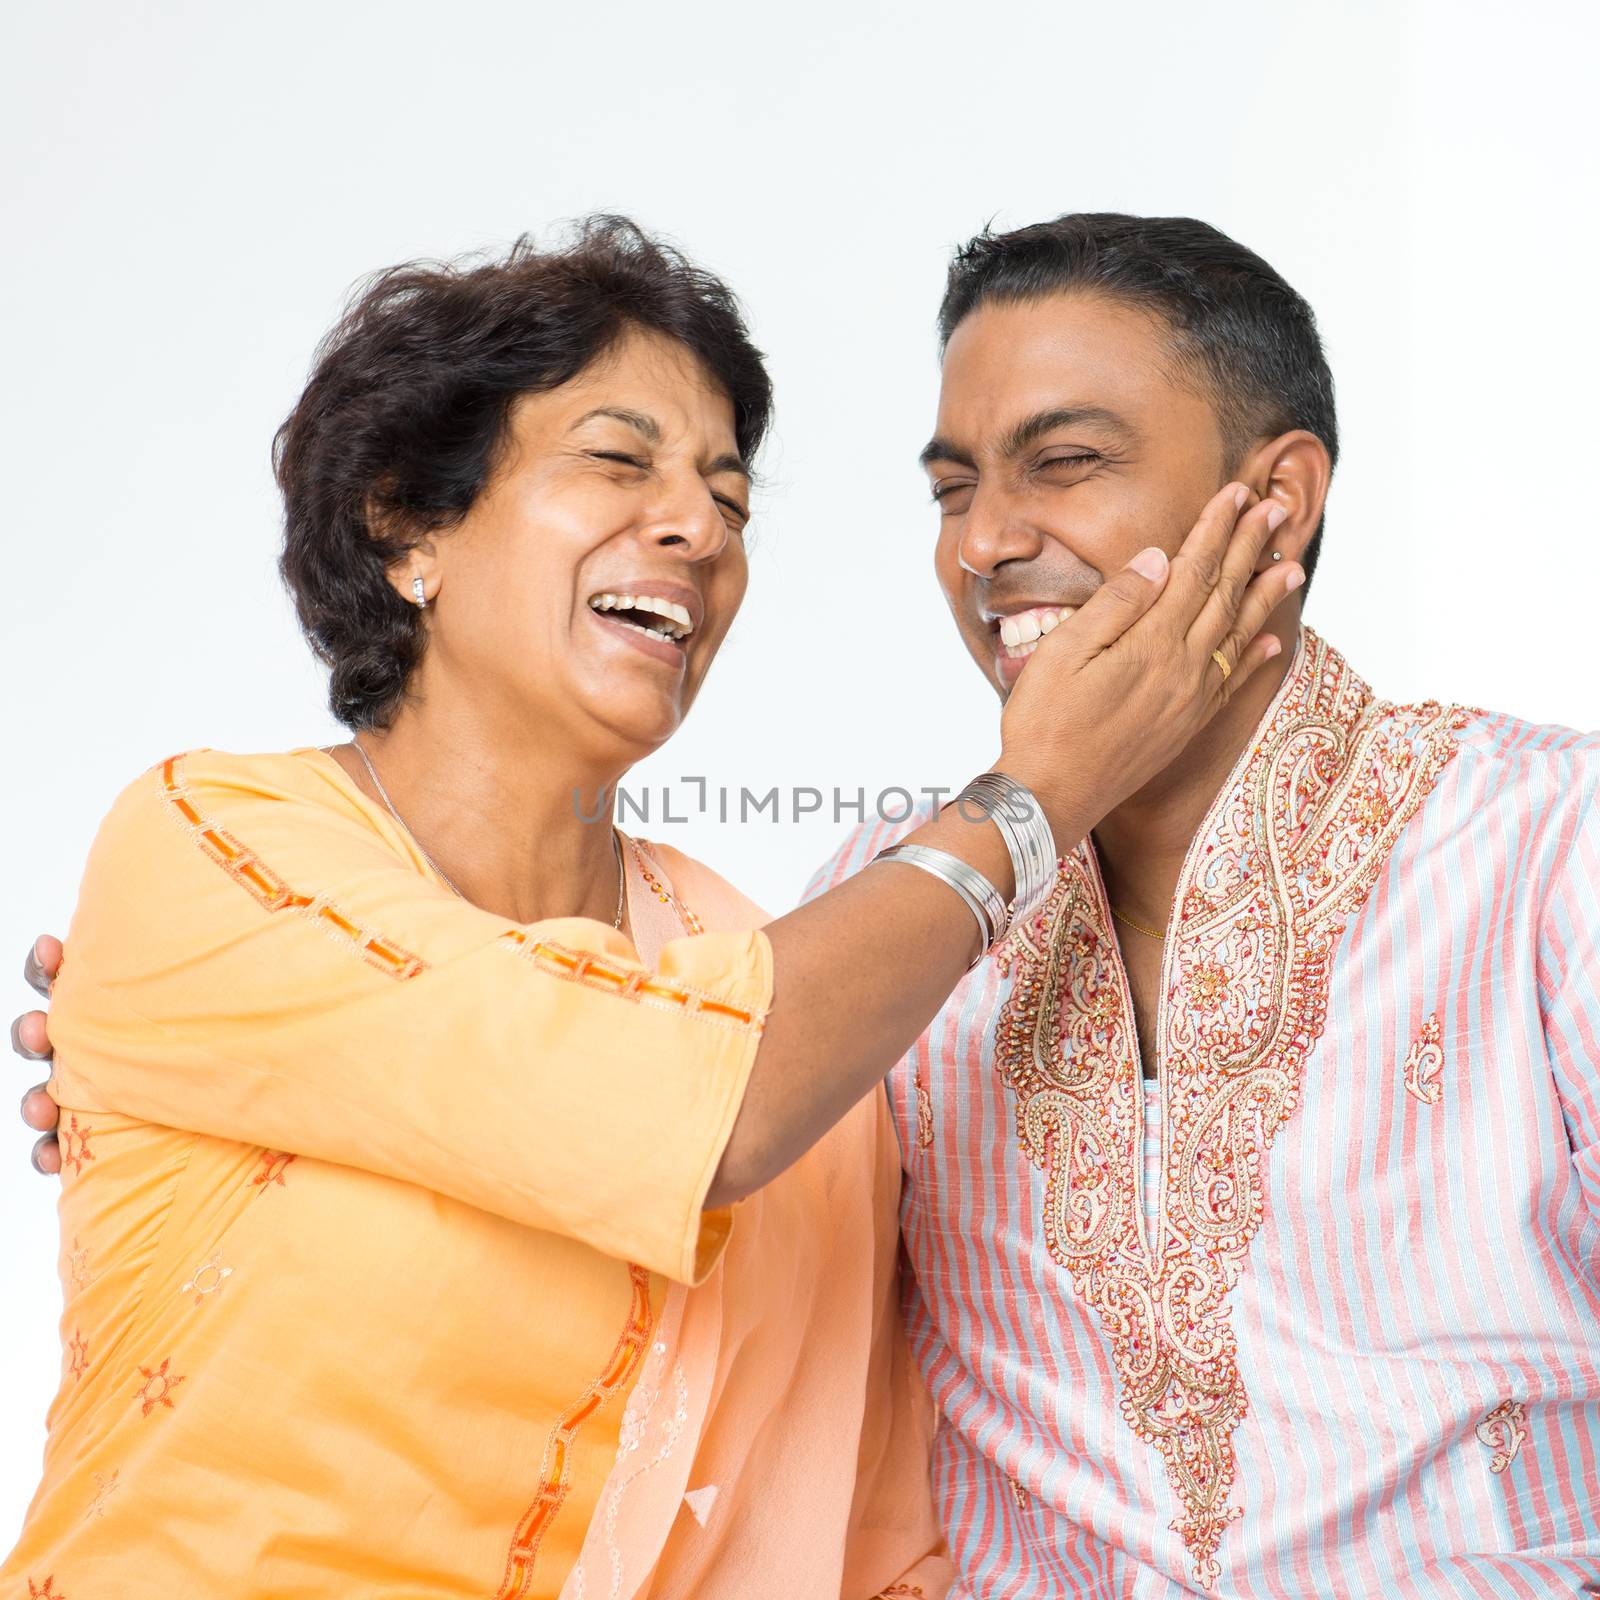 Portrait of happy Indian family having fun conversation at home. Mature 50s Indian mother and her 30s grown son.